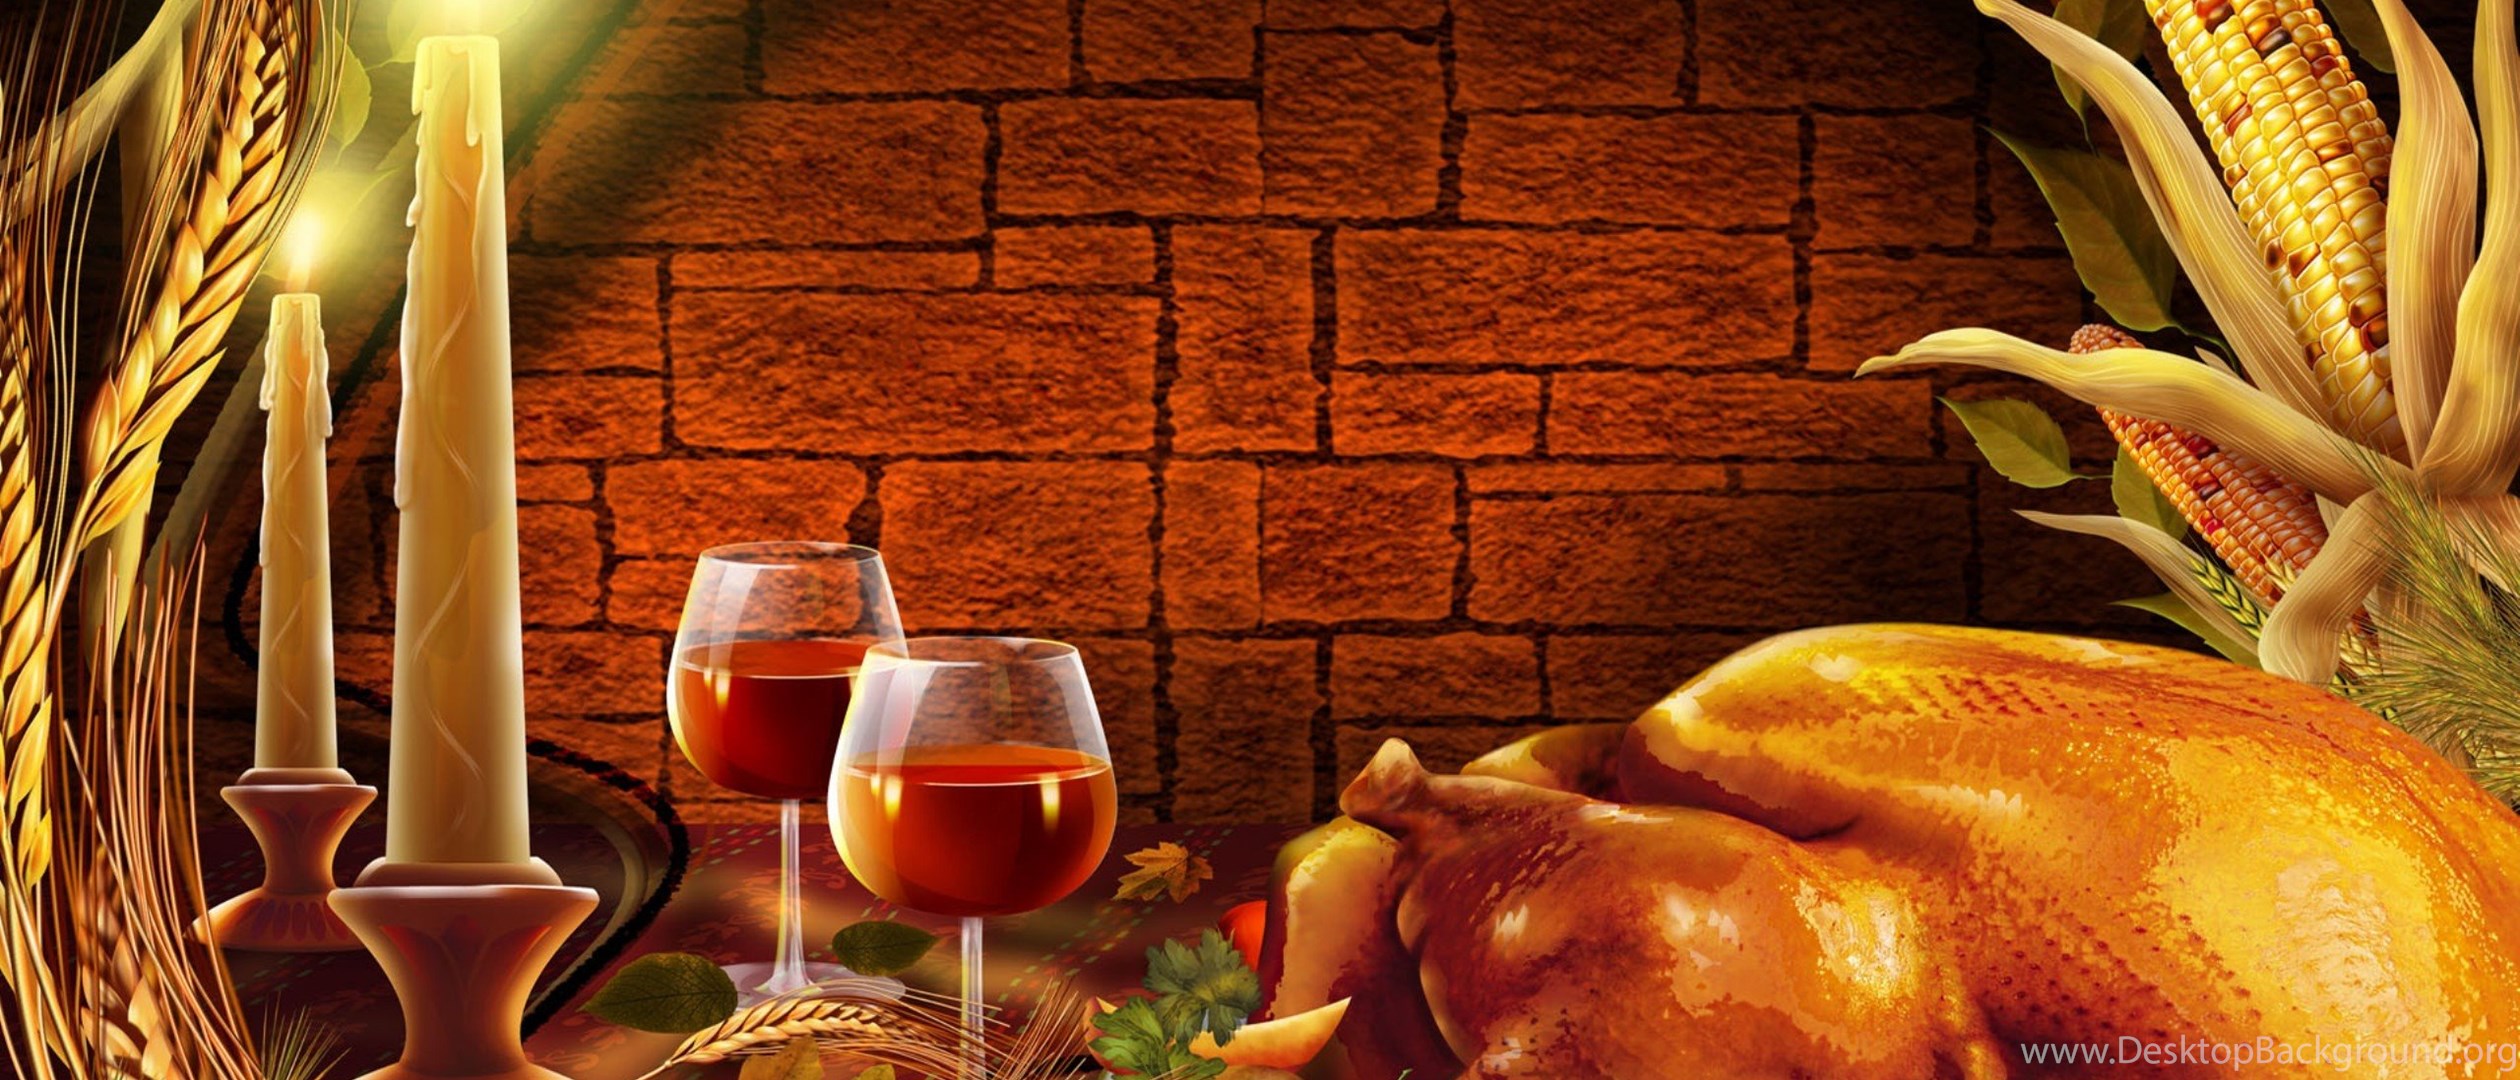 Download Free Happy Thanksgiving Wallpapers Widescreen Wide 21:9 2520x1080 ...